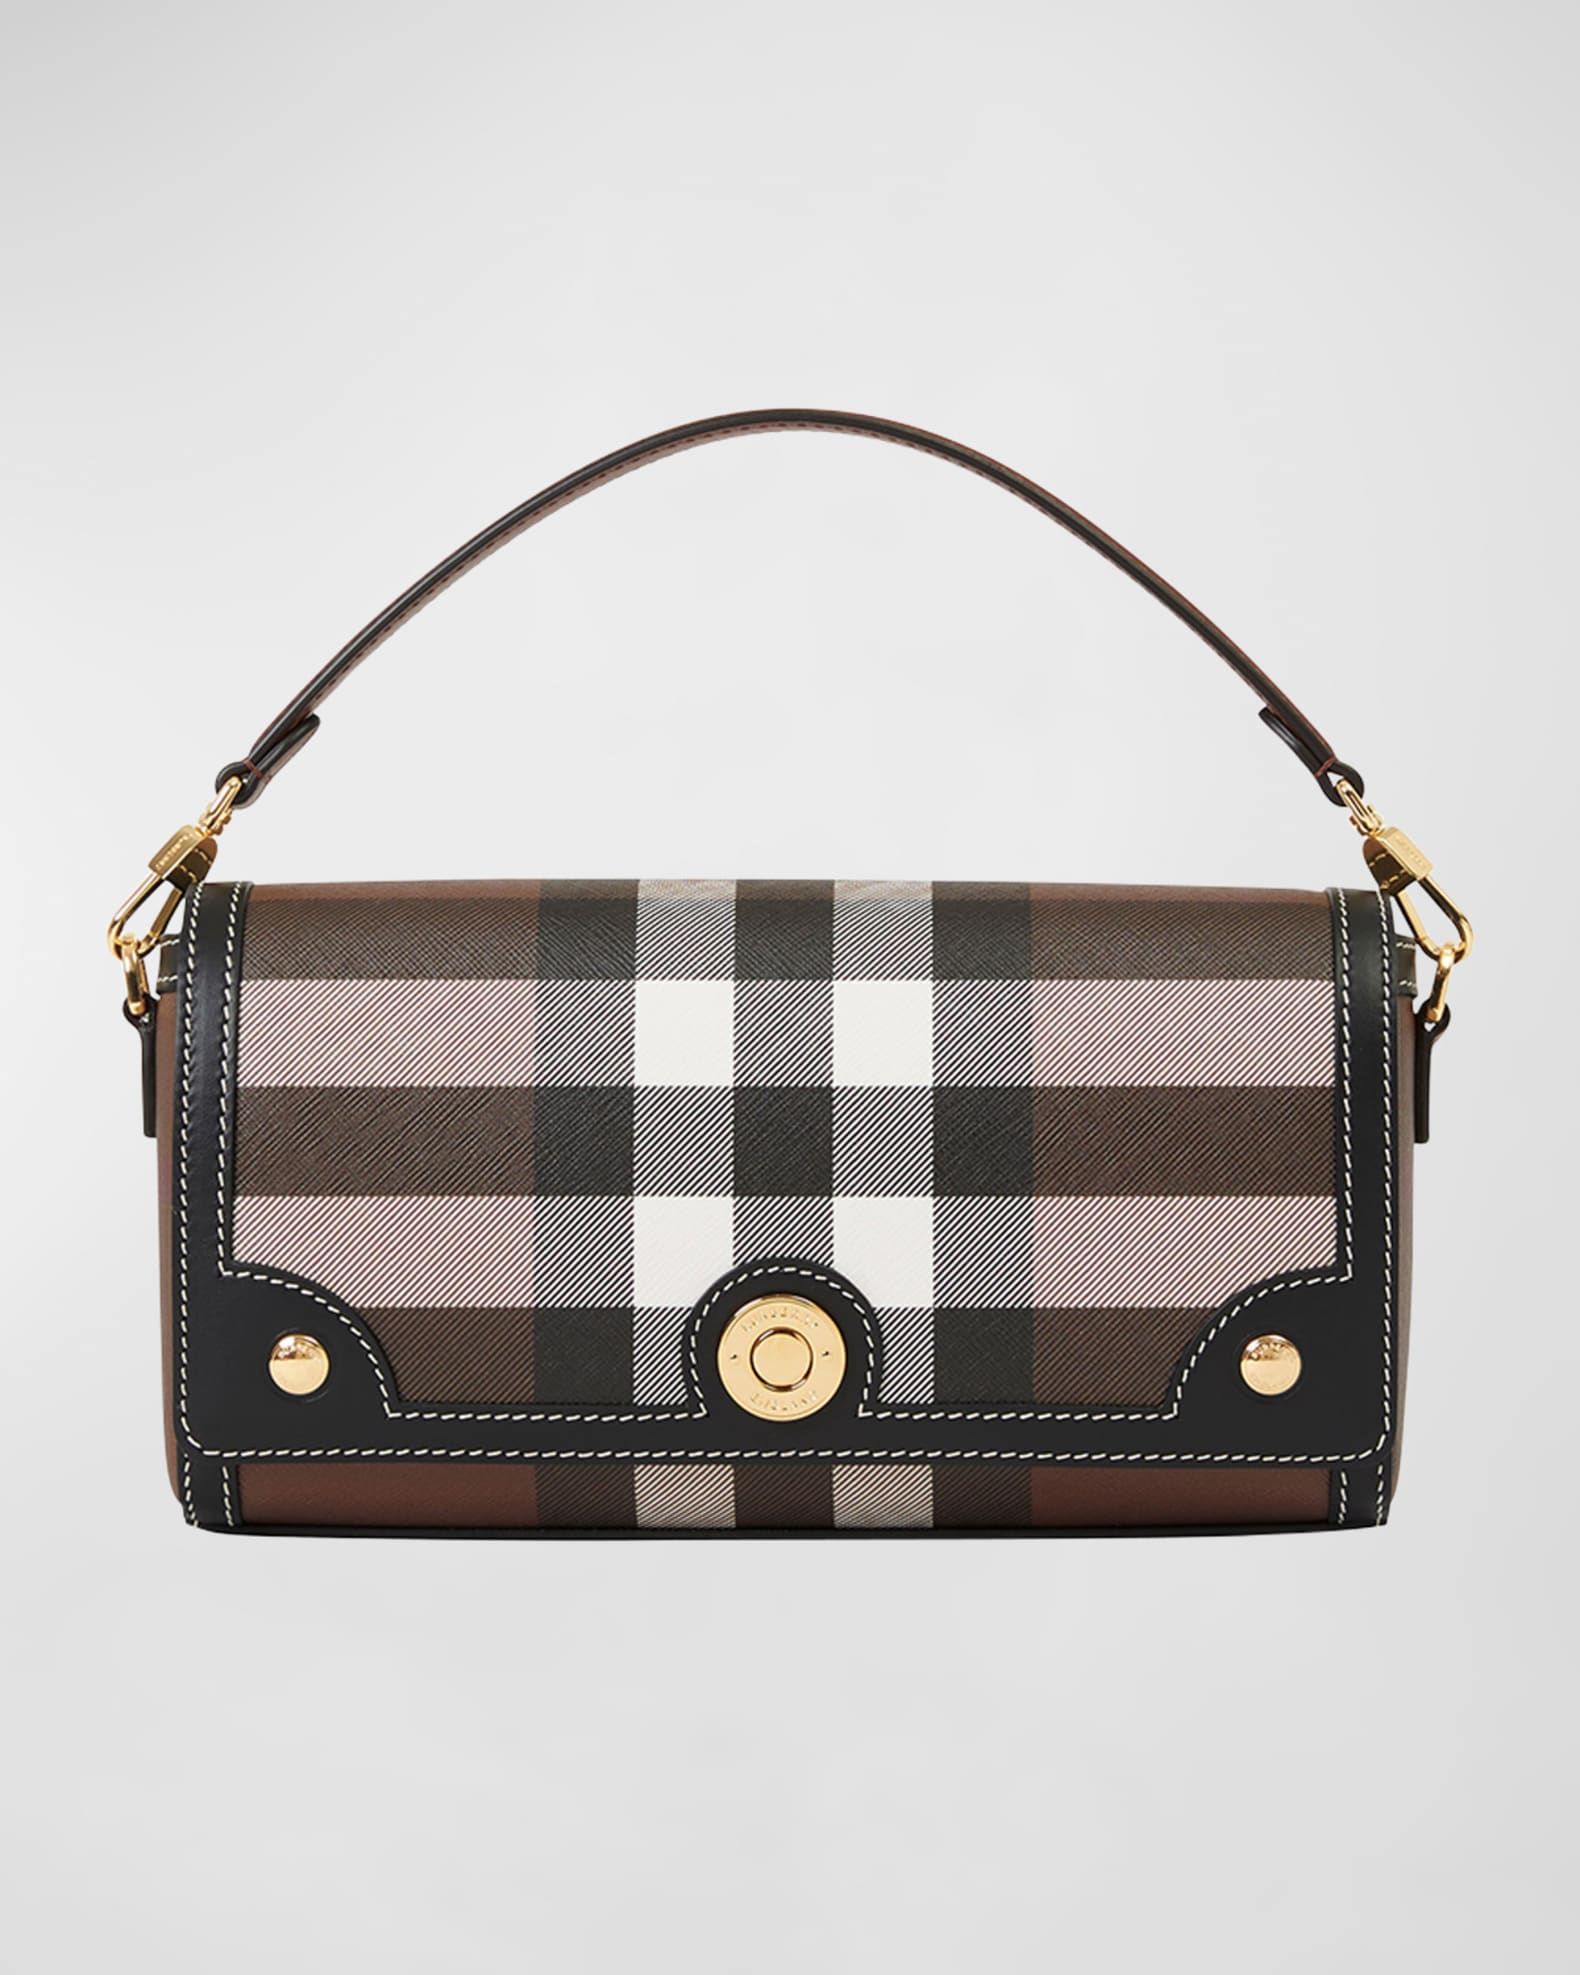 Burberry Vintage Check Note Shoulder Bag Black in Calfskin Leather/Cotton  with Gold-tone - US